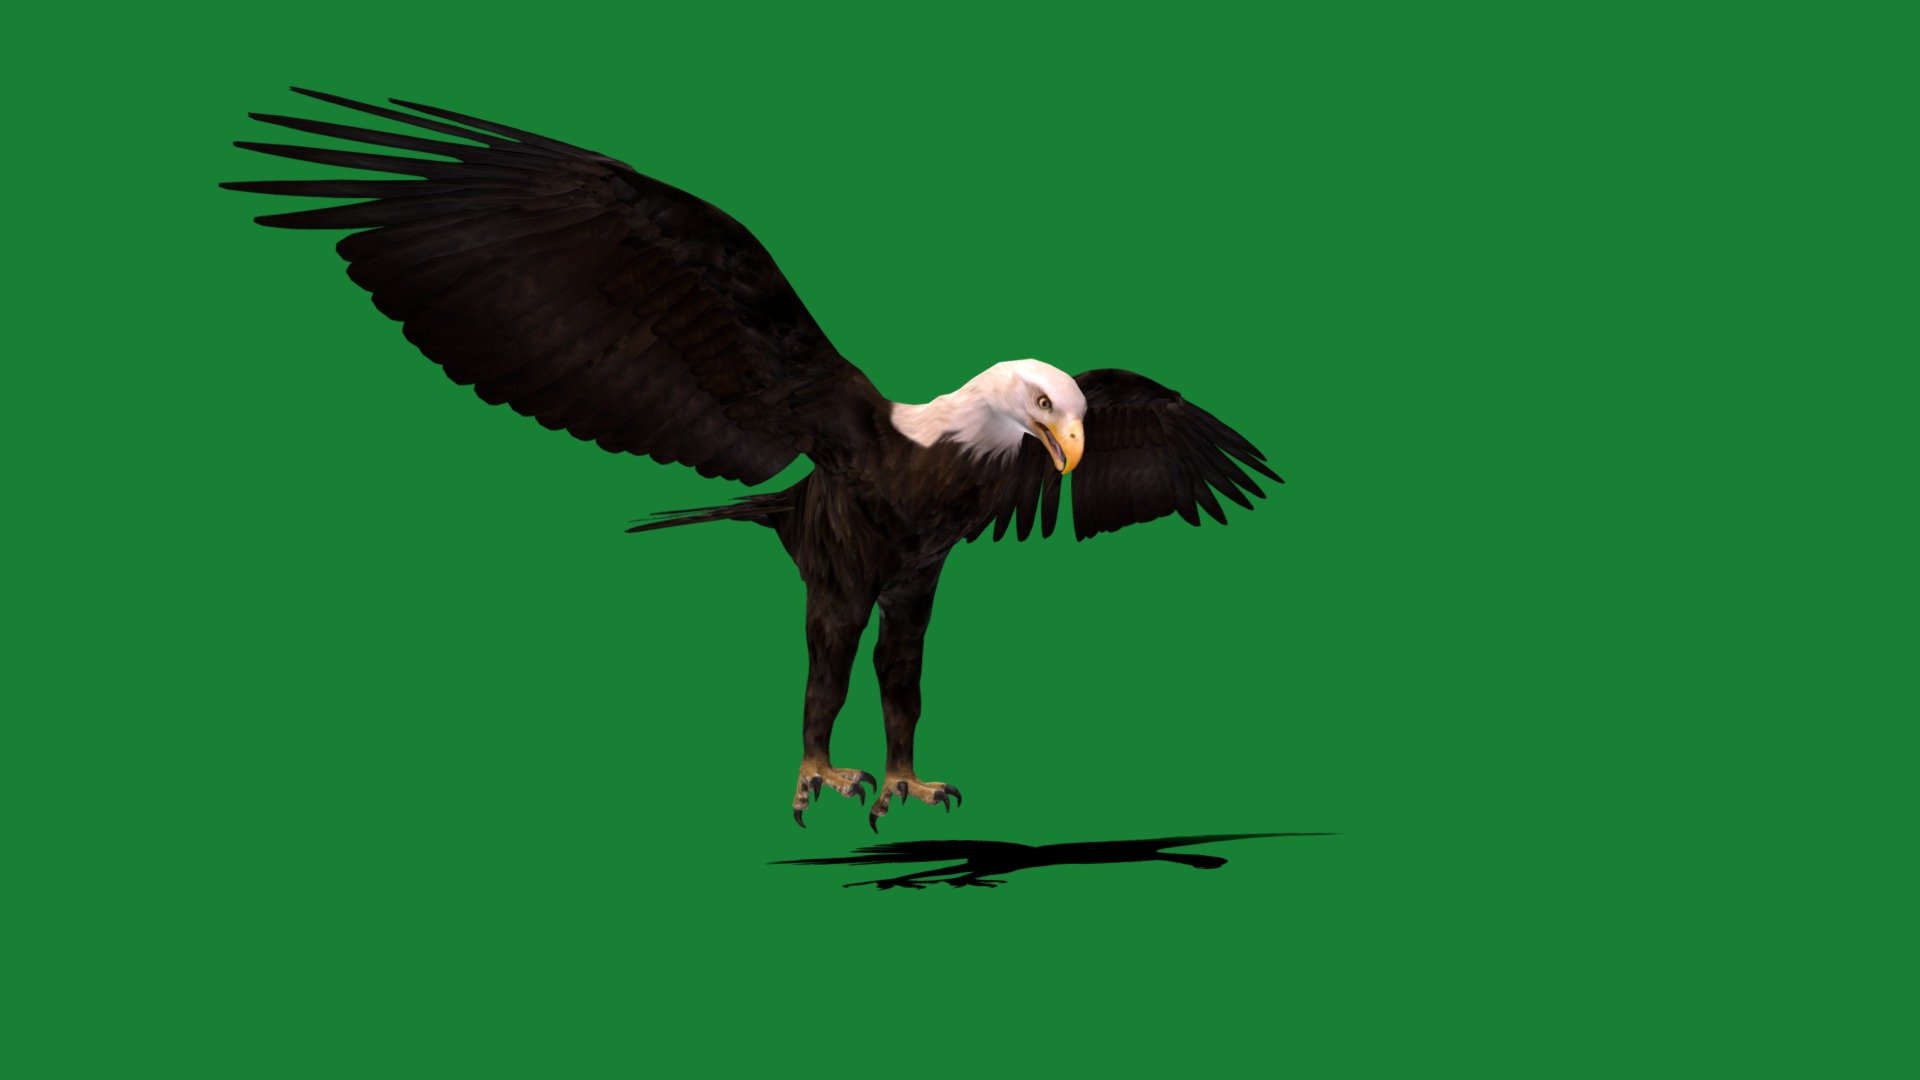 Bald Eagle Bird(Sea Eagle)United States

Haliaeetus leucocephalus Animal Bird(Largest Bird)Pet,White-headed sea eagle

1 Draw Calls

Low-MidPoly

Game Ready (Assets)

Subdivision Surface Ready

4-Animations 

4K PBR Textures 1 Material

Unreal/Unity FBX 

Blend File 3.6.5 LTS / 4 Plus

USDZ File (AR Ready). Real Scale Dimension (Xcode ,Reality Composer, Keynote Ready)

Textures Files

GLB File (Unreal 5.1 Plus Native Support,Godot)


Gltf File ( Spark AR, Lens Studio(SnapChat),Effector(Tiktok),Spline,Play Canvas,Omiverse)Compatible




Triangles -22585



Faces -14282

Edges -32812

Vertices -18780

Diffuse, Metallic, Roughness , Normal Map ,Specular Map,AO

The bald eagle is the national symbol of the United States,since 1782.native to North America ,is one of the largest birds on the continent. The bald eagle's Latin name means &ldquo;white-headed sea eagle